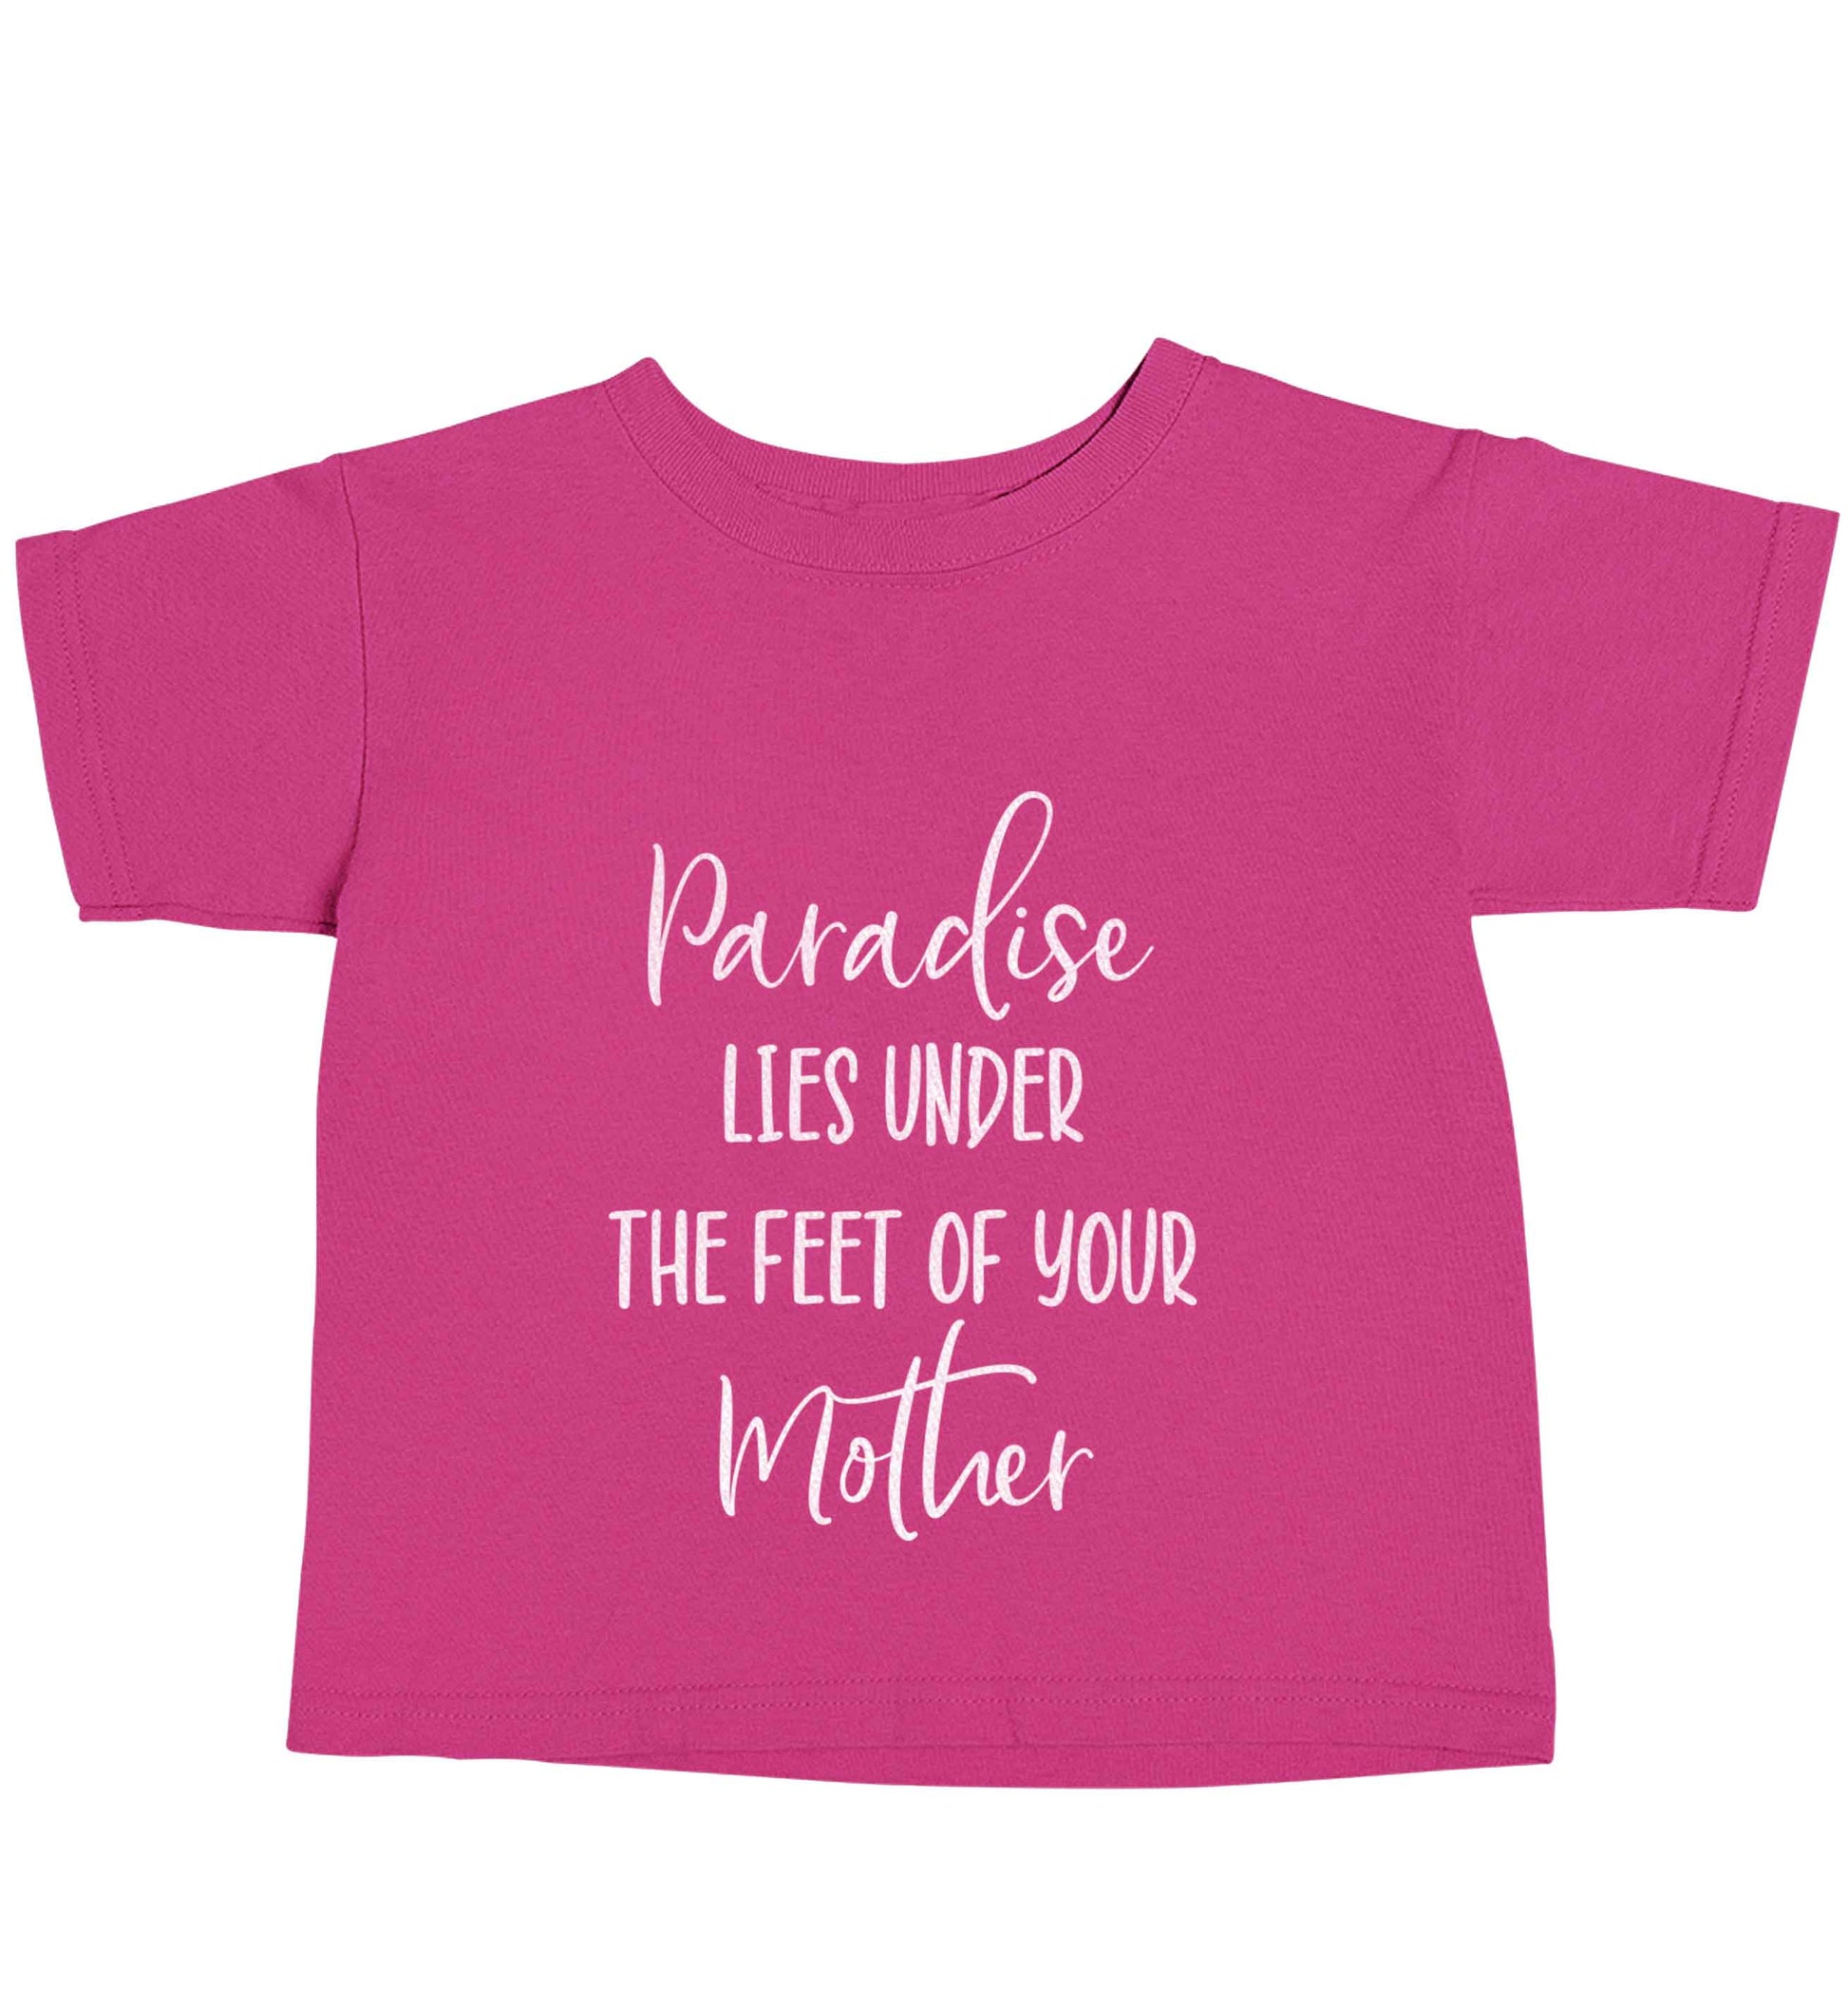 Paradise lies under the feet of your mother pink baby toddler Tshirt 2 Years